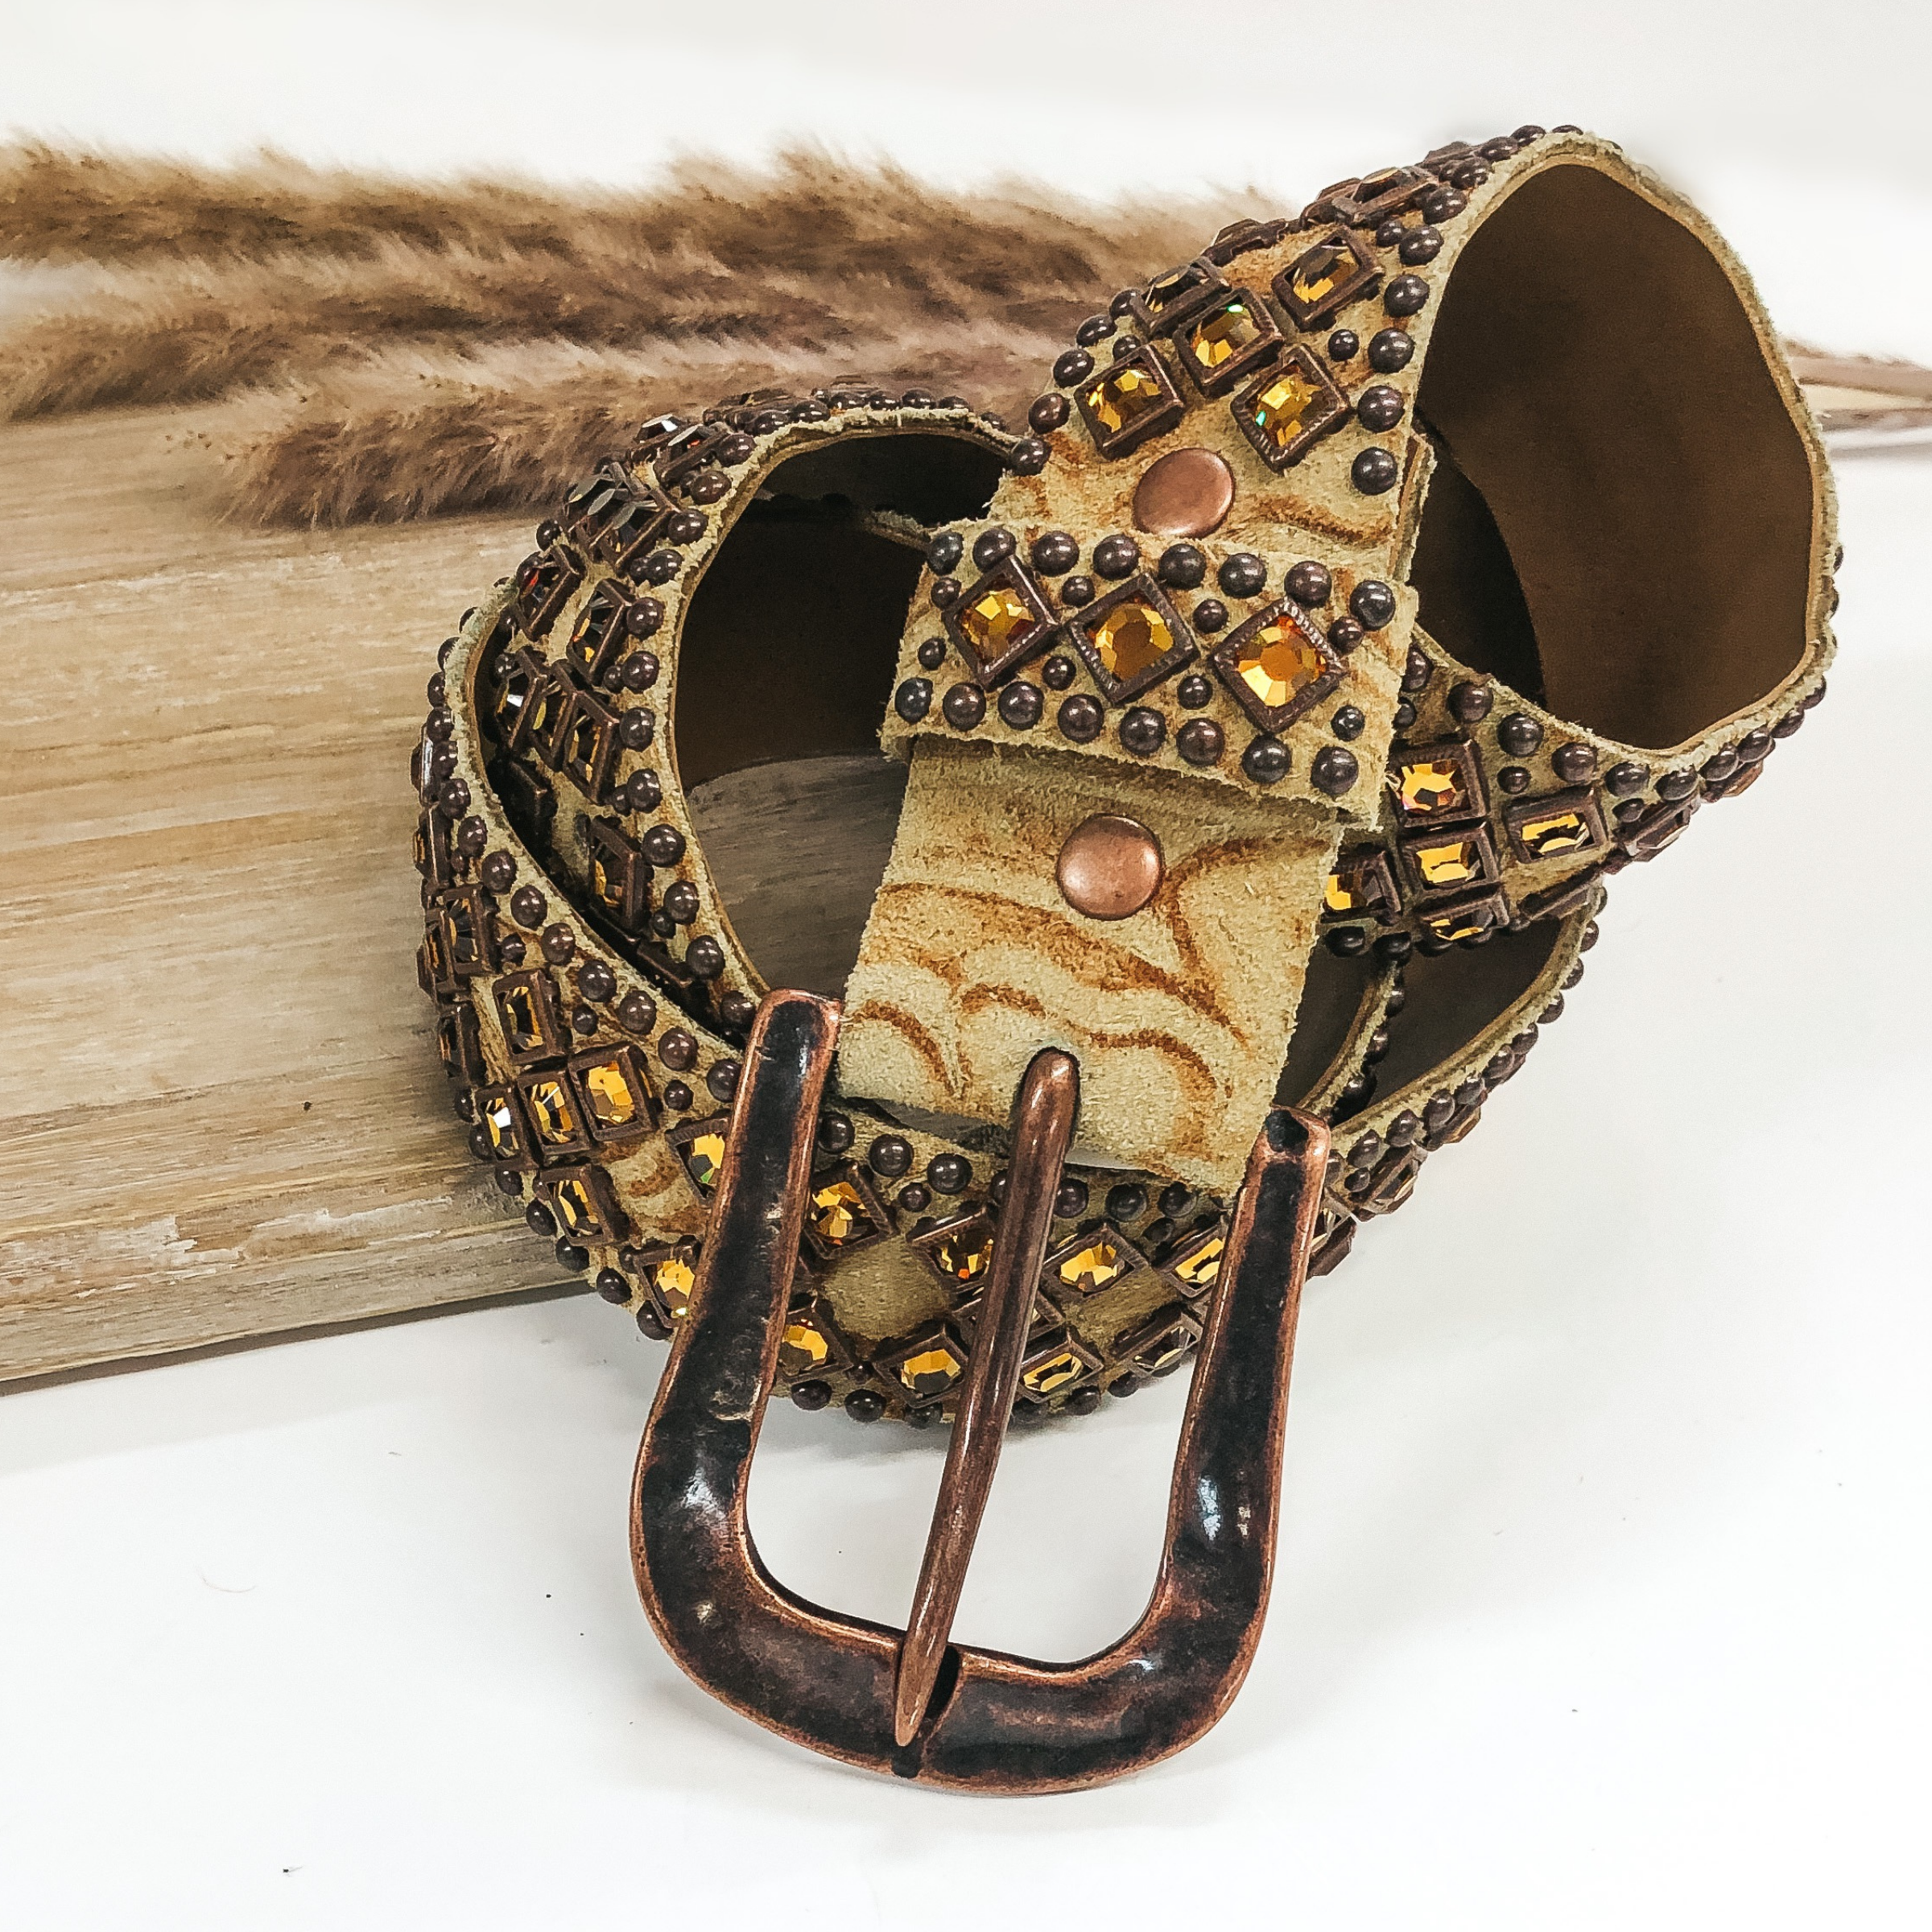 Kippys | Roughed Out Leather Belt with Hammered Bronze Buckle and Brown Crystals - Giddy Up Glamour Boutique